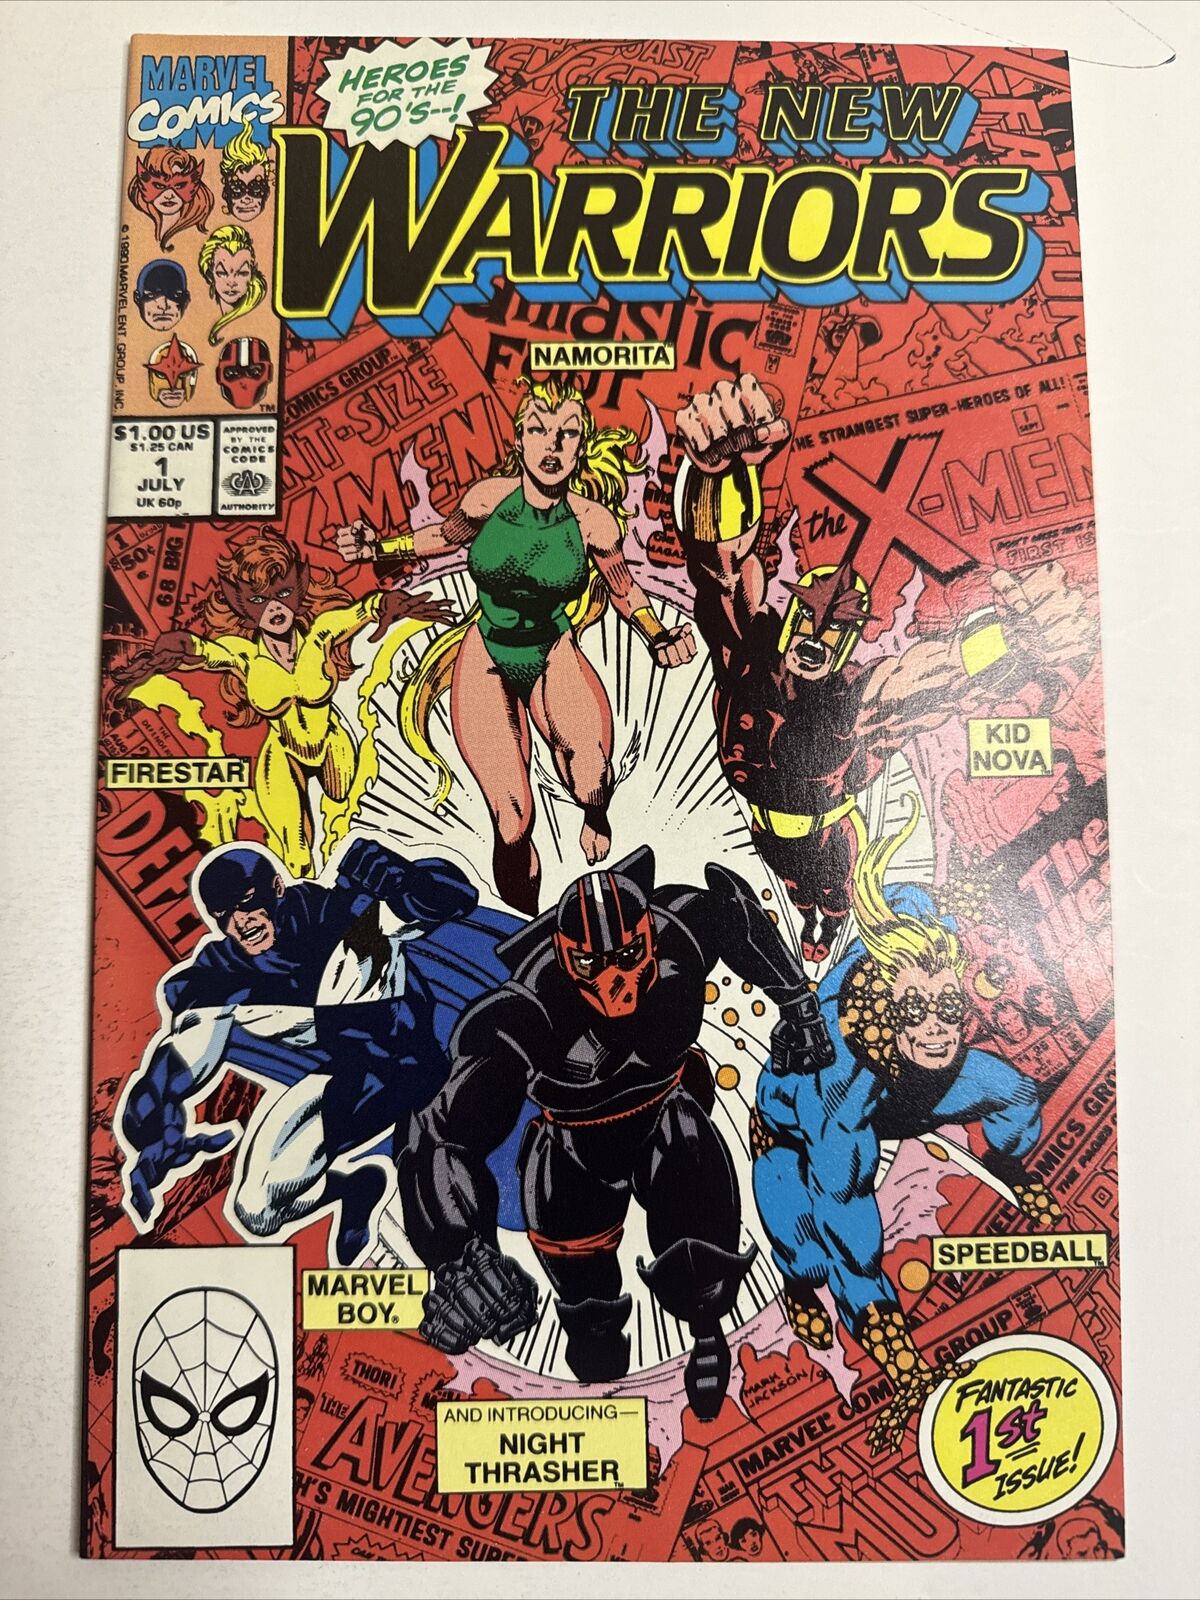 The New Warriors # 1: “From The Ground Up” 1st Night Thrasher, Marvel 1990 NM-